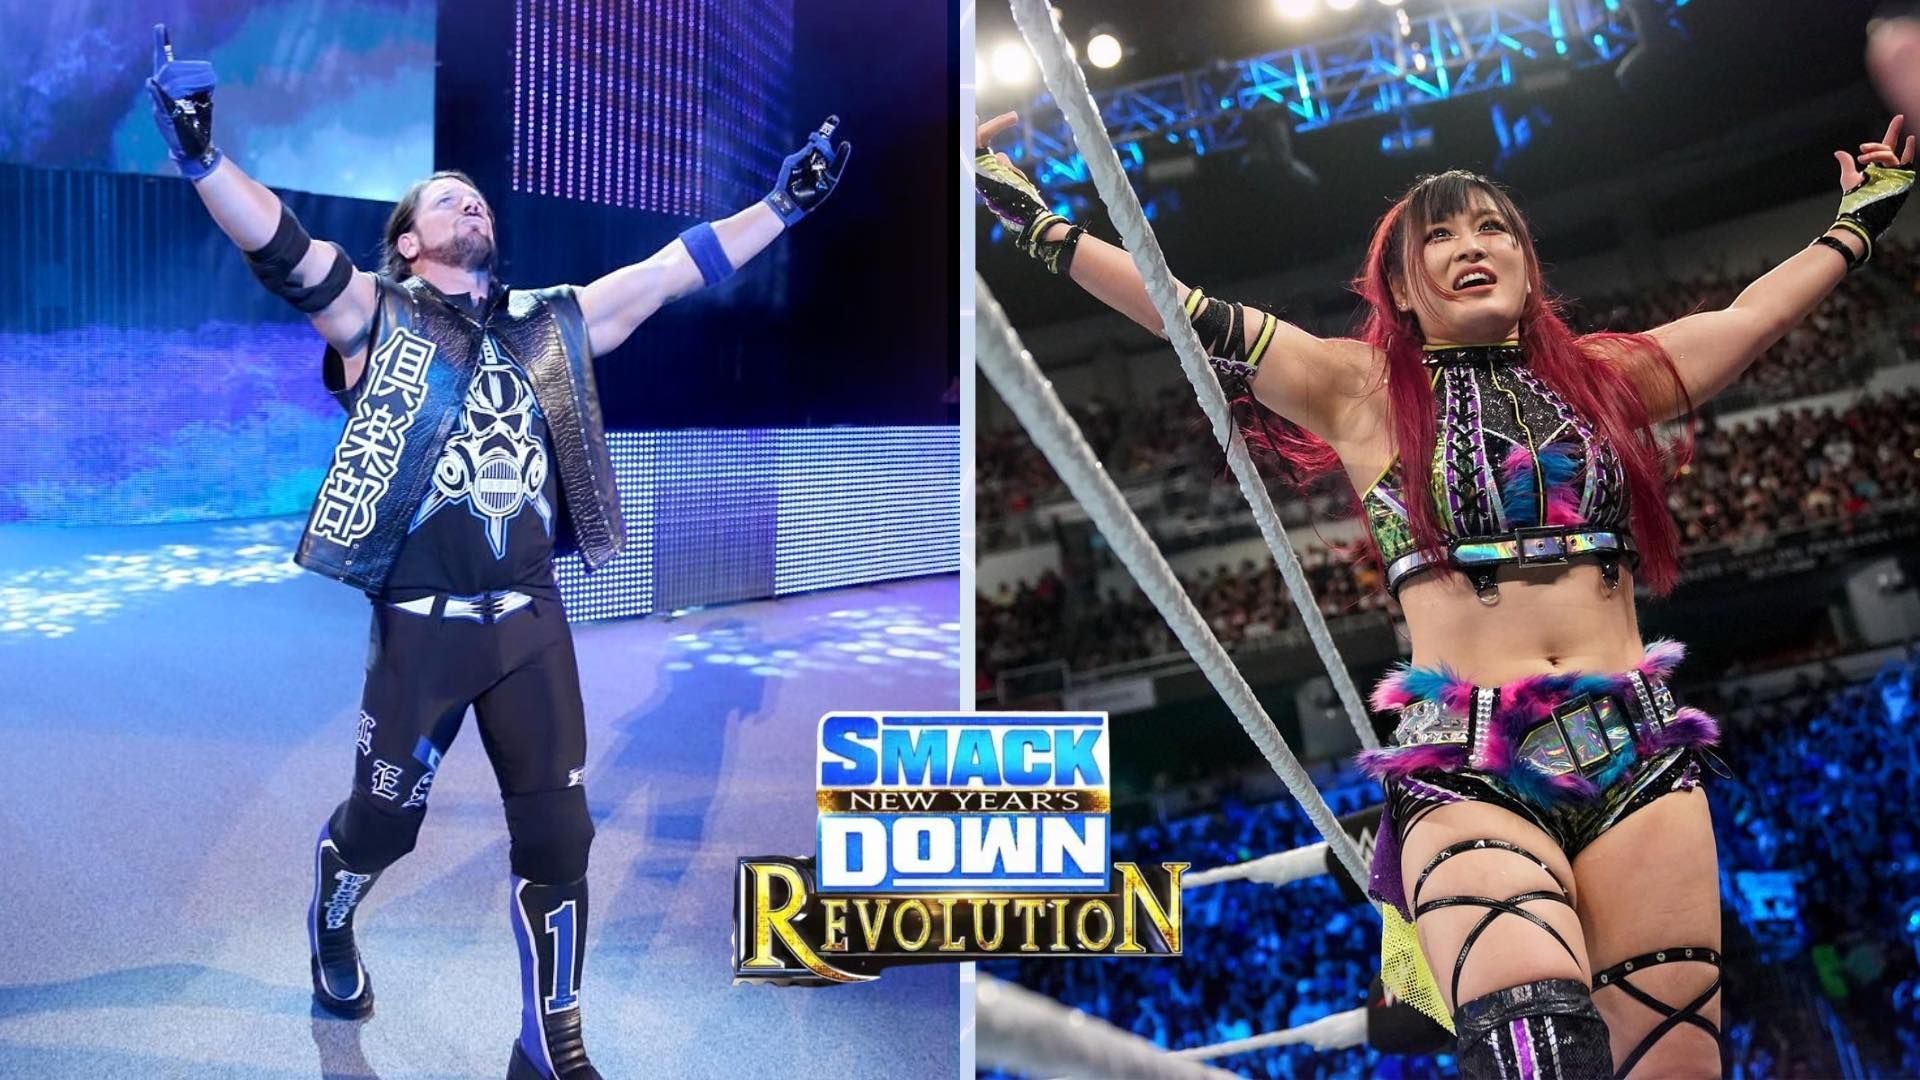 AJ Styles and Iyo Sky will be in action at WWE SmackDown: New Year